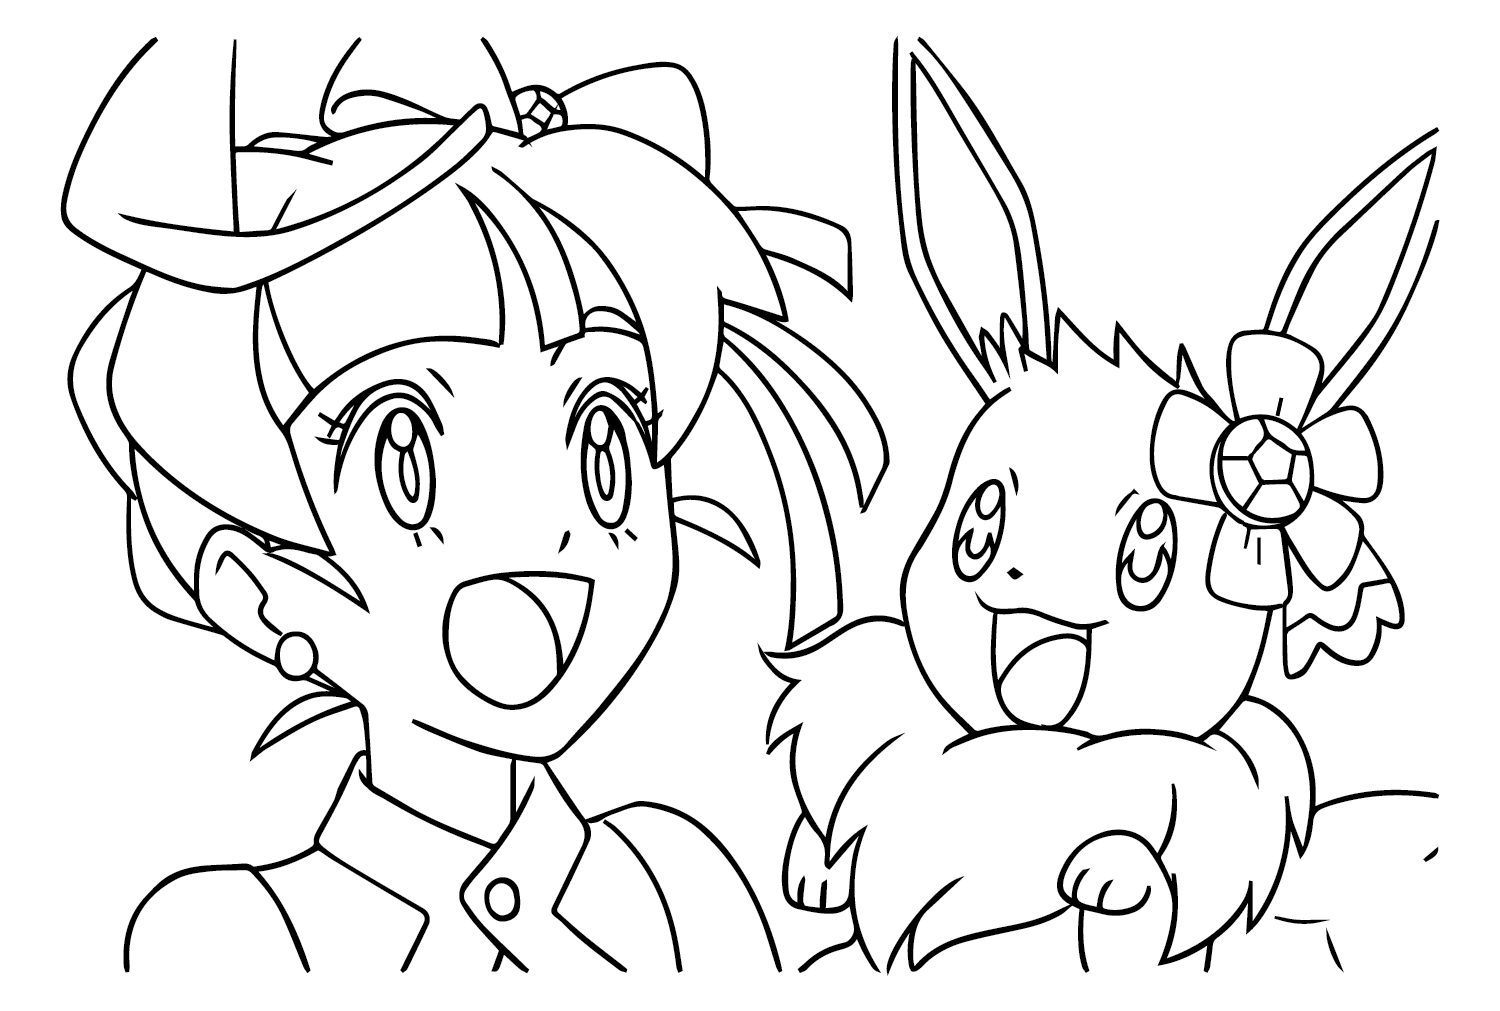 Chloe Cerise and Eevee Pokemon Images to Color from Eevee